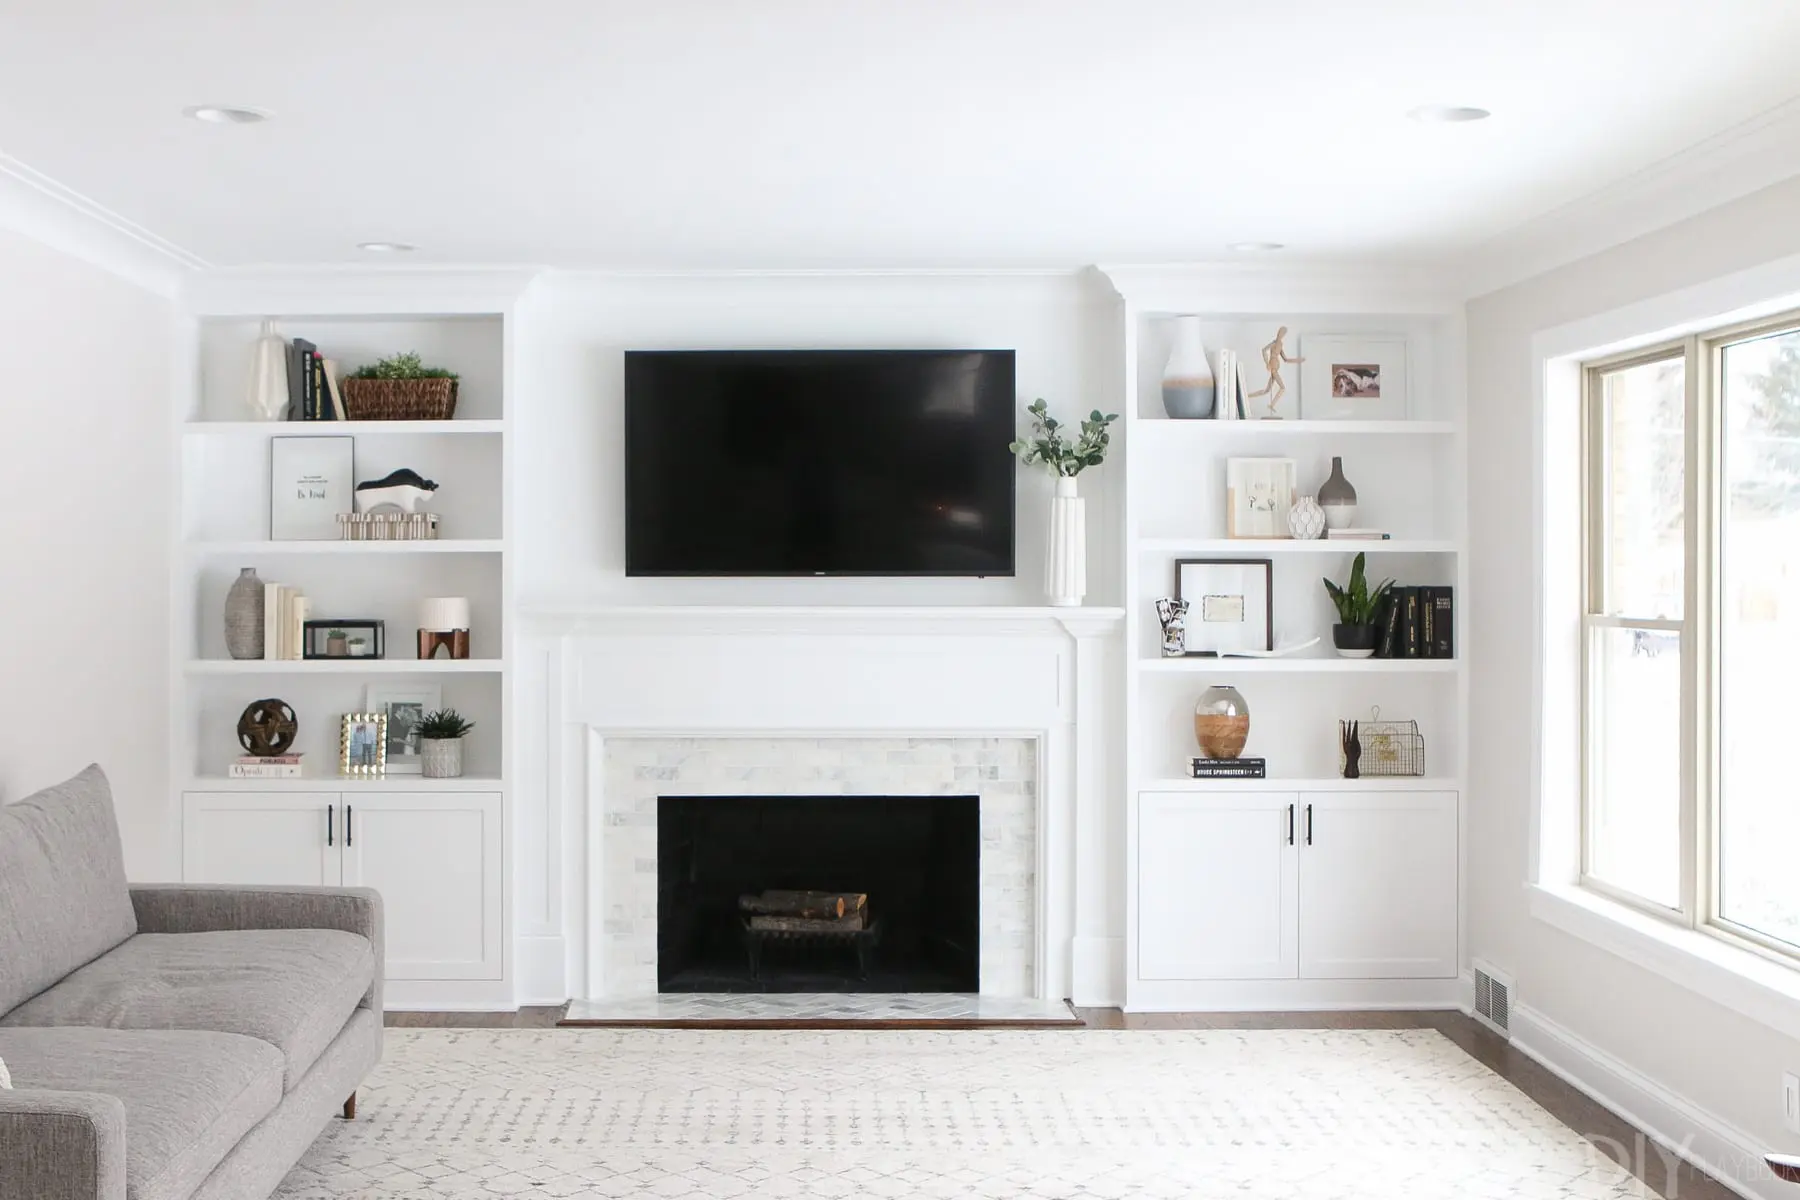 Decorating Built In Shelves, Built In Bookcase Ideas Around Fireplace